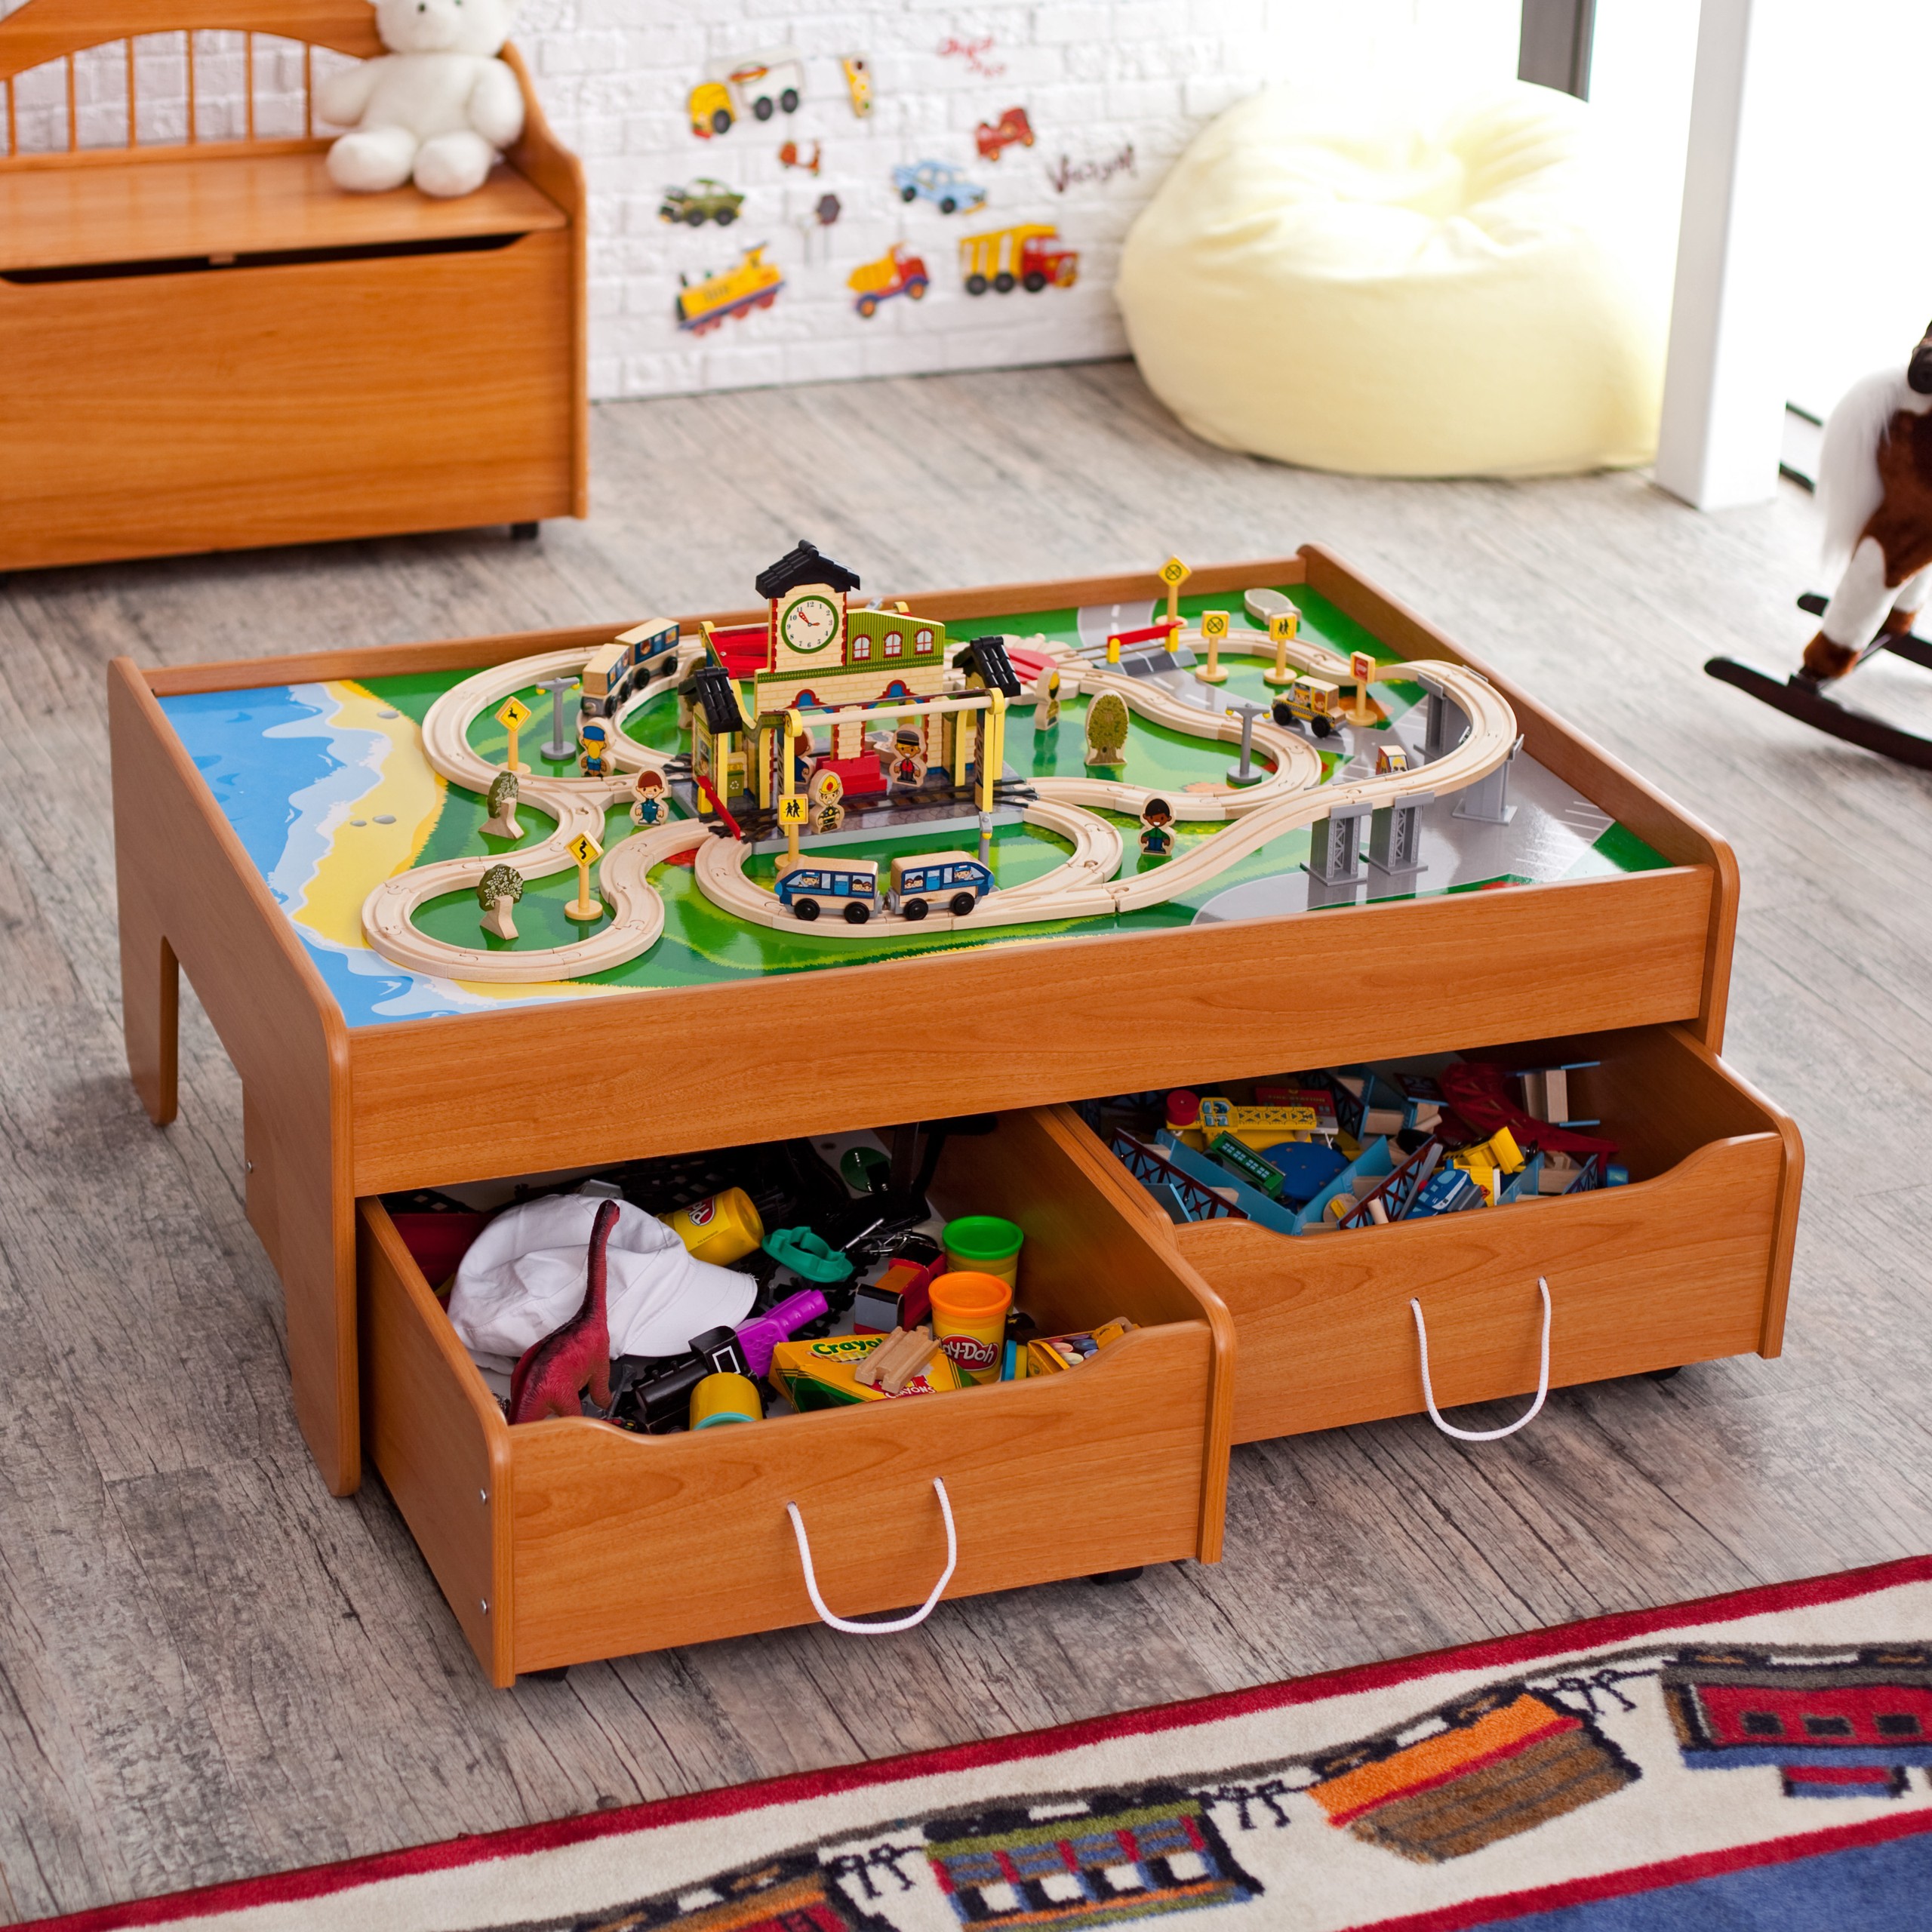 Playtime toys trains and train tables